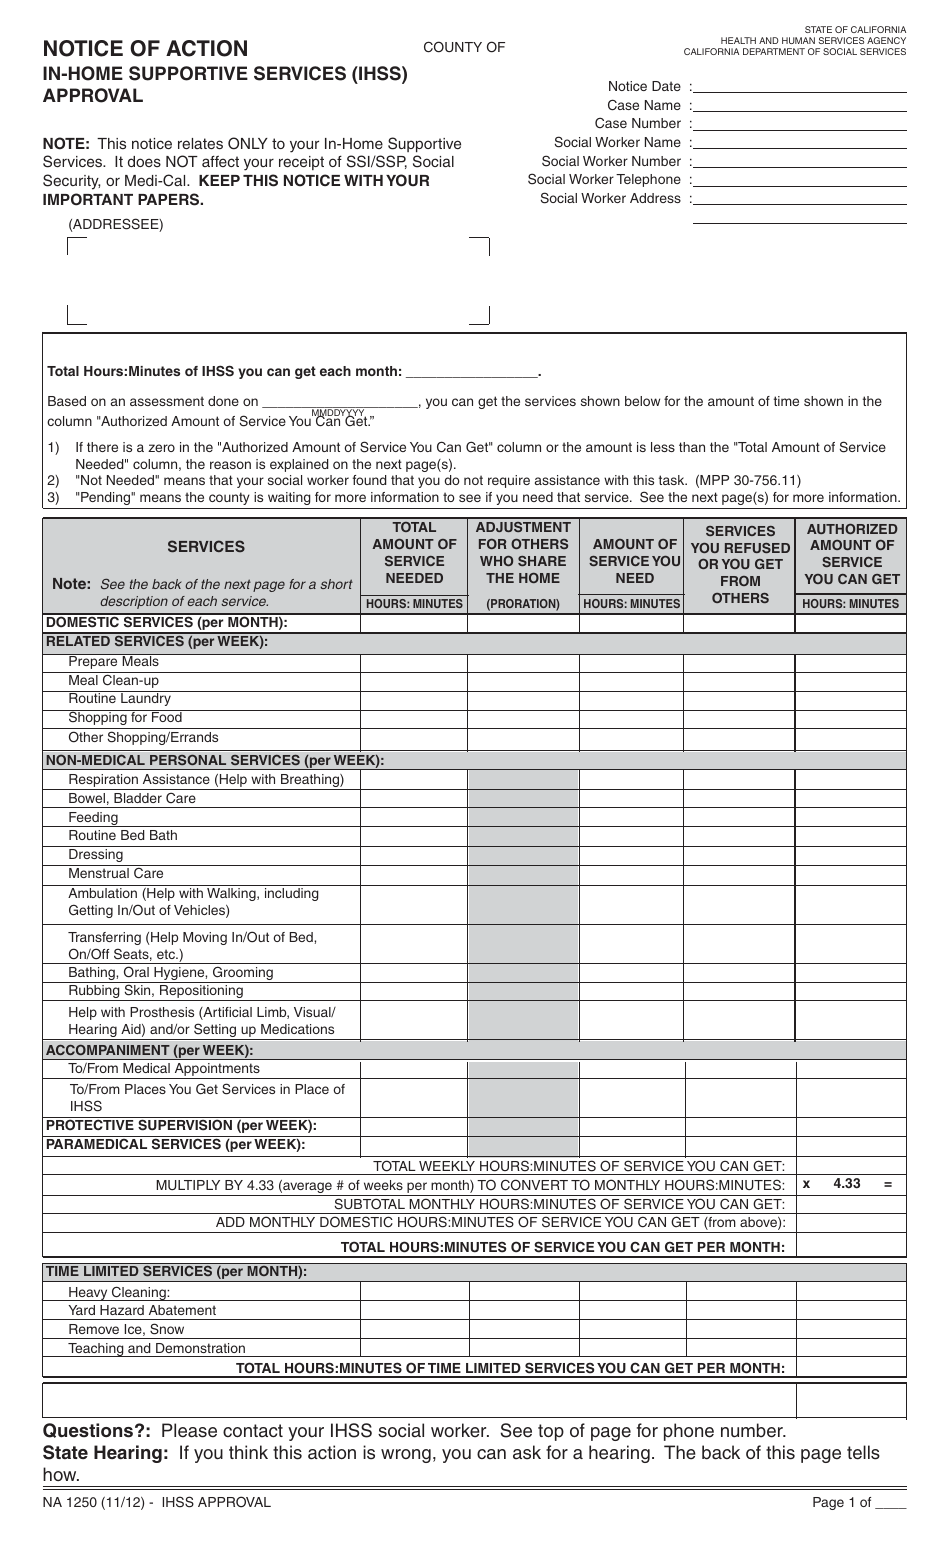 Form NA1250 Notice of Action - in-Home Supportive Services (Ihss) Approval - California, Page 1